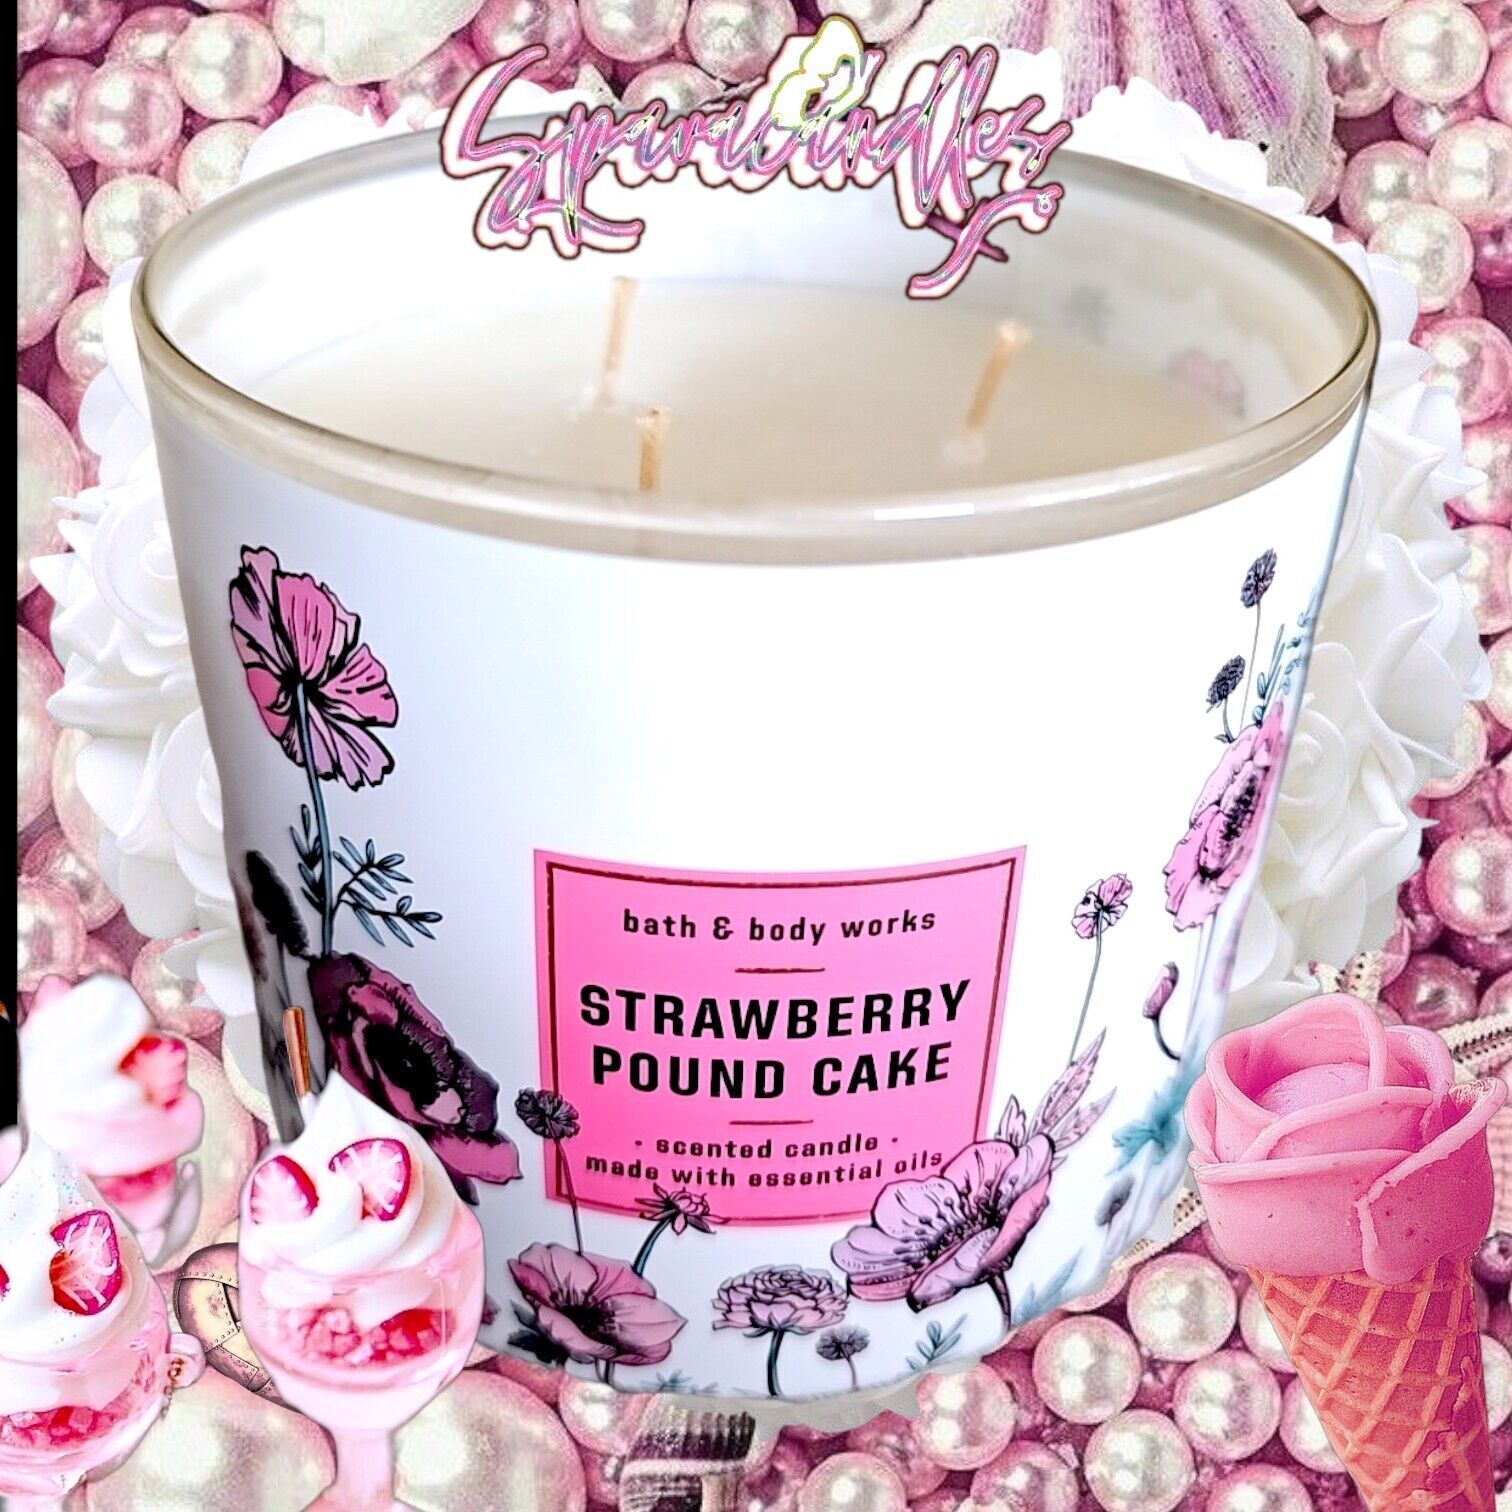 New STRAWBERRY POUND CAKE 3-Wick Candle US Seller